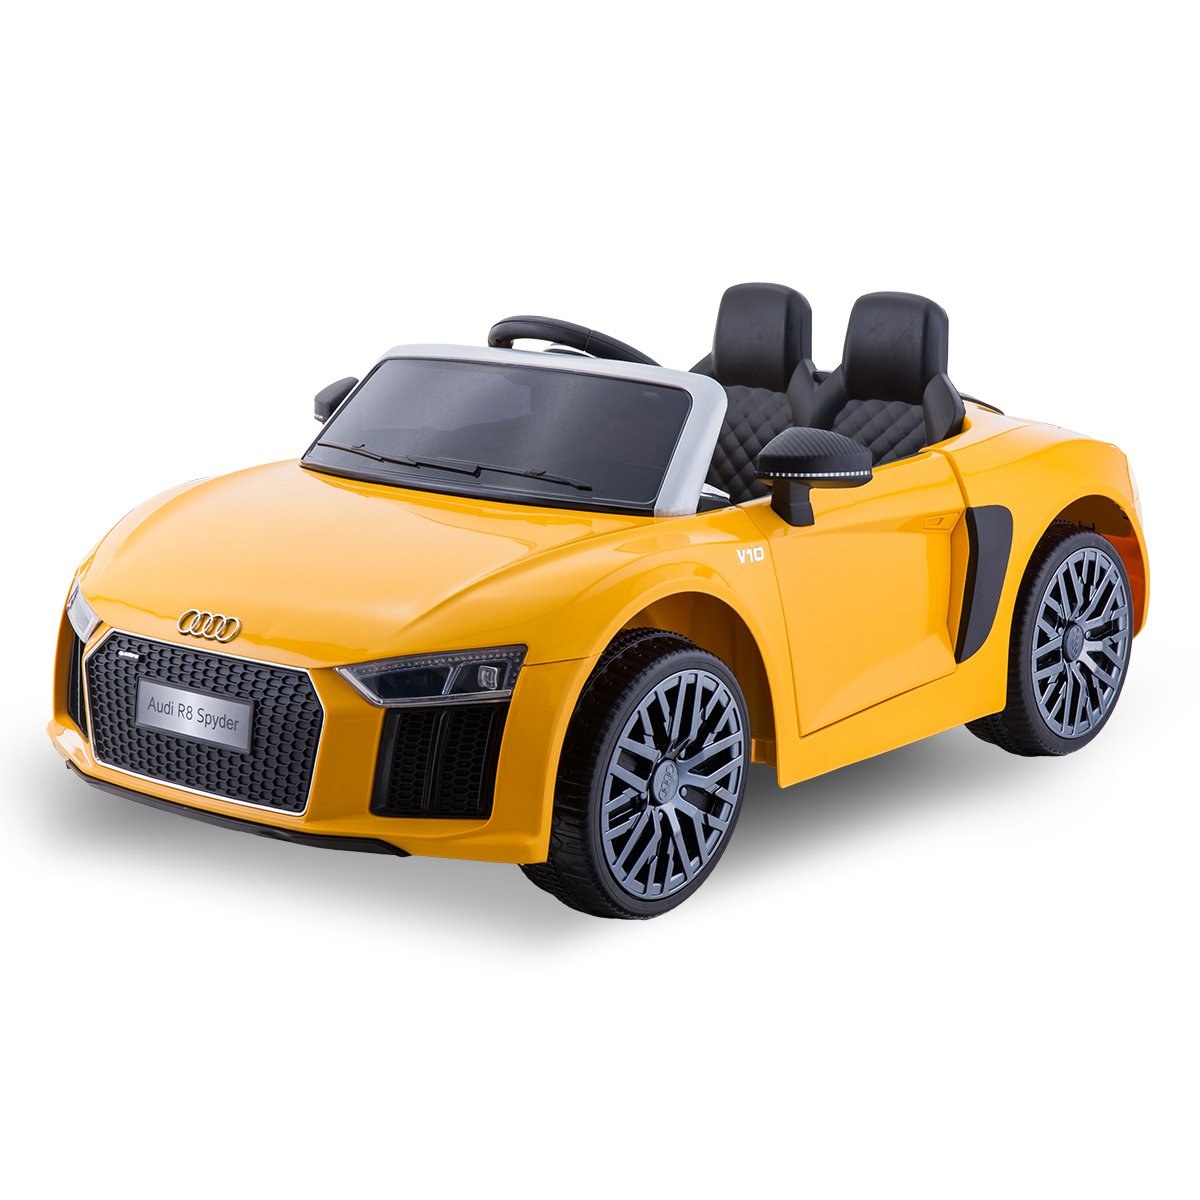 R8 Spyder Audi Licensed Kids Electric Ride On Car Remote Control Yellow 1